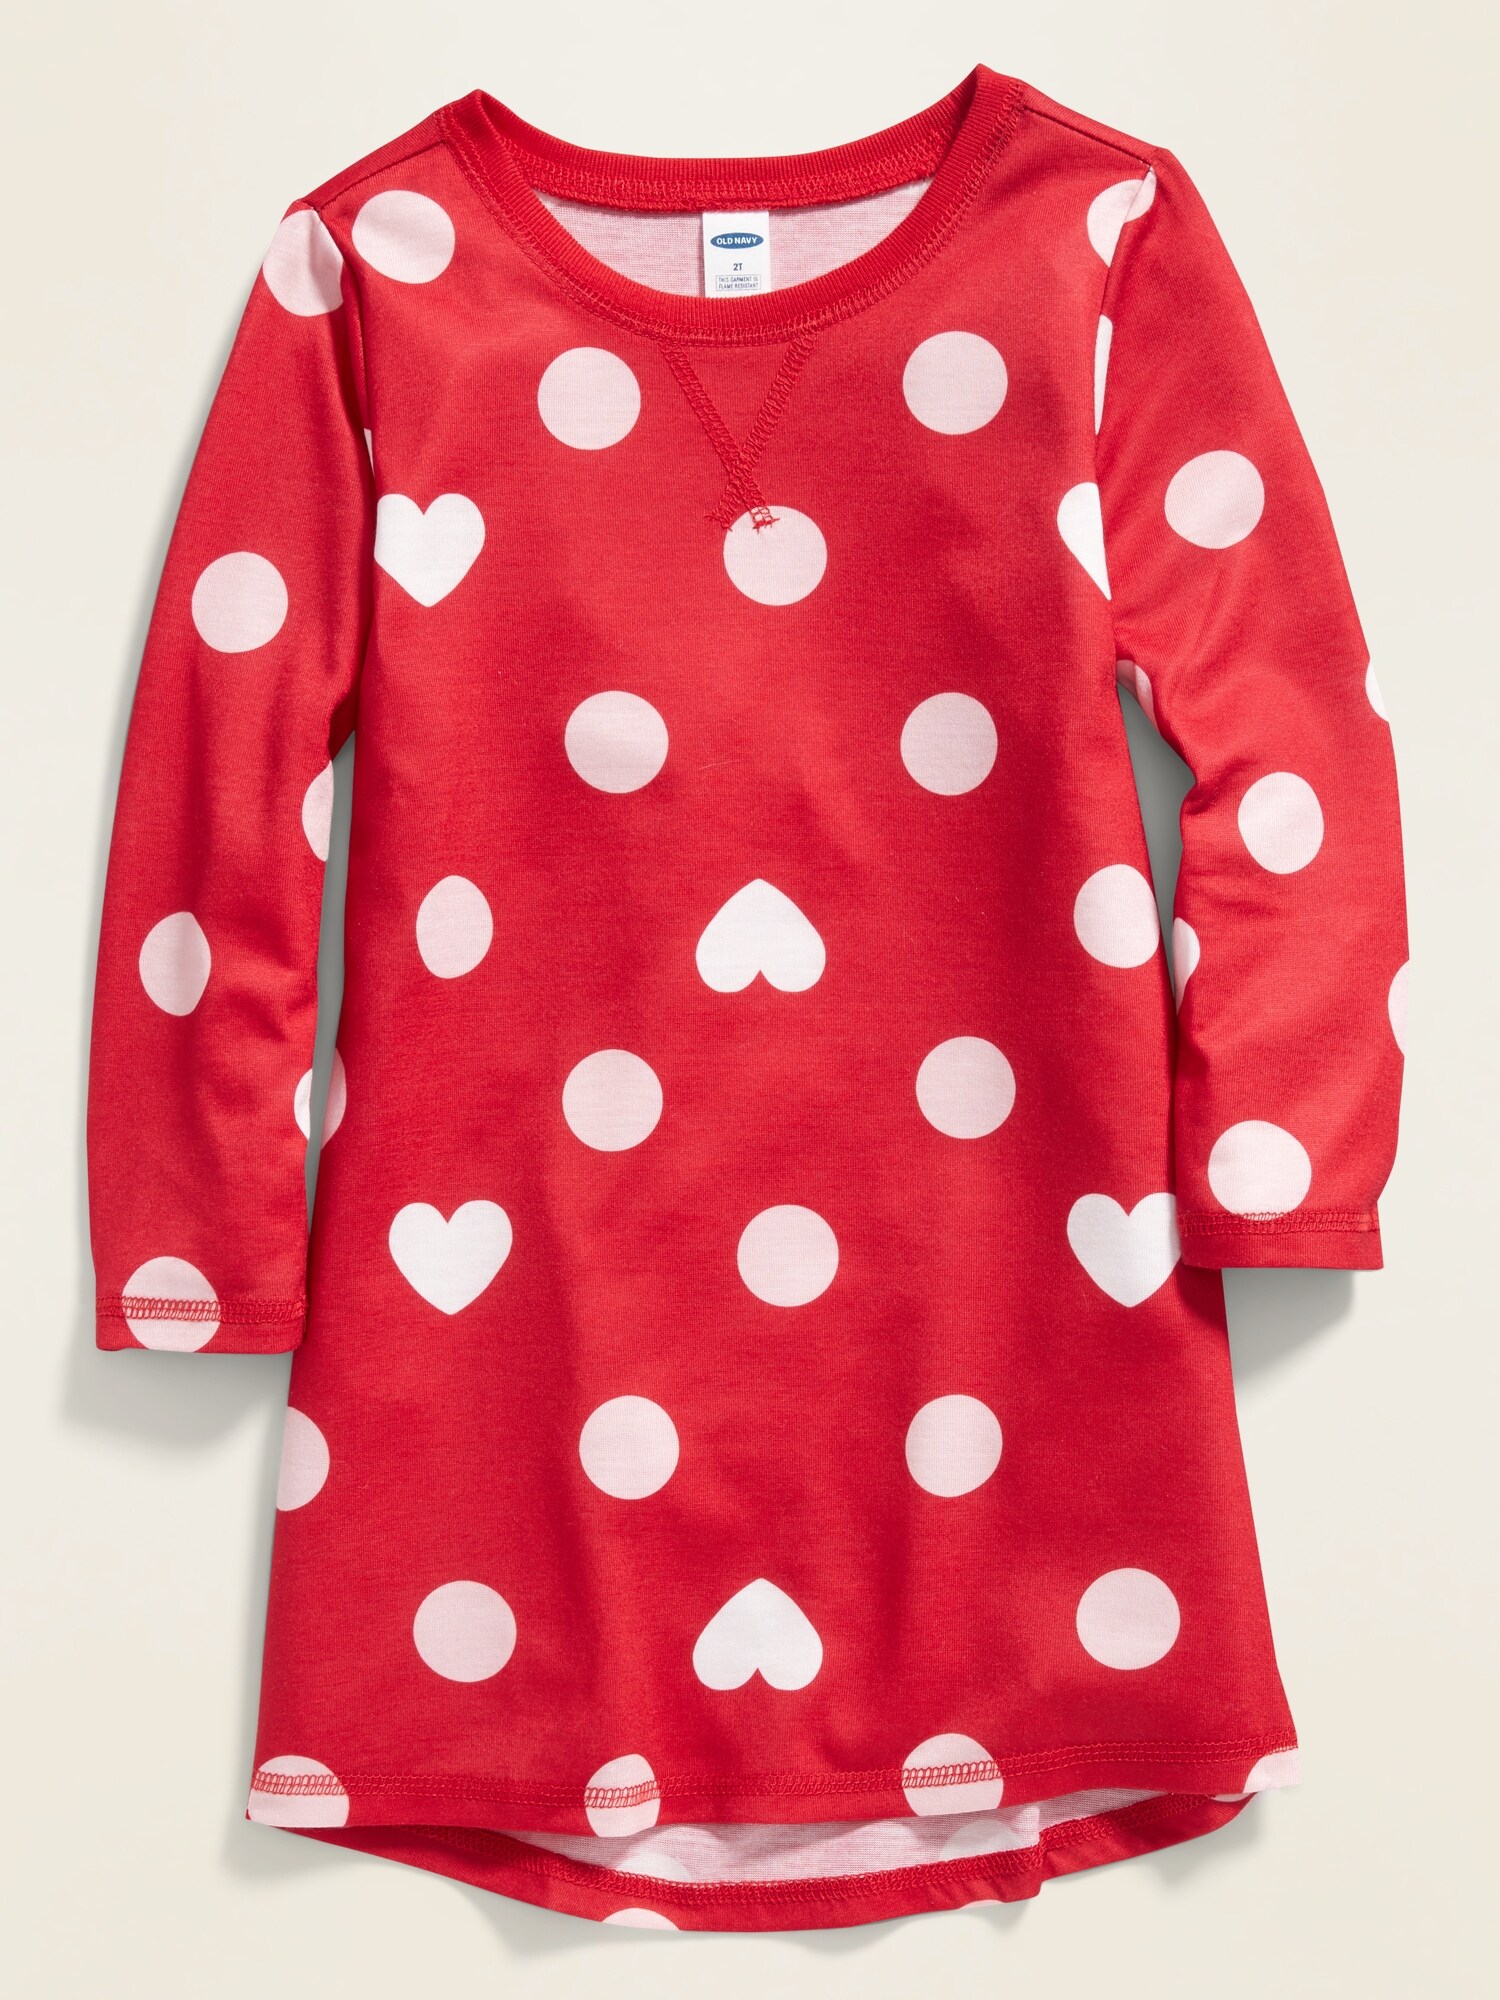 Printed Nightgown for Toddler Girls & Baby | Old Navy